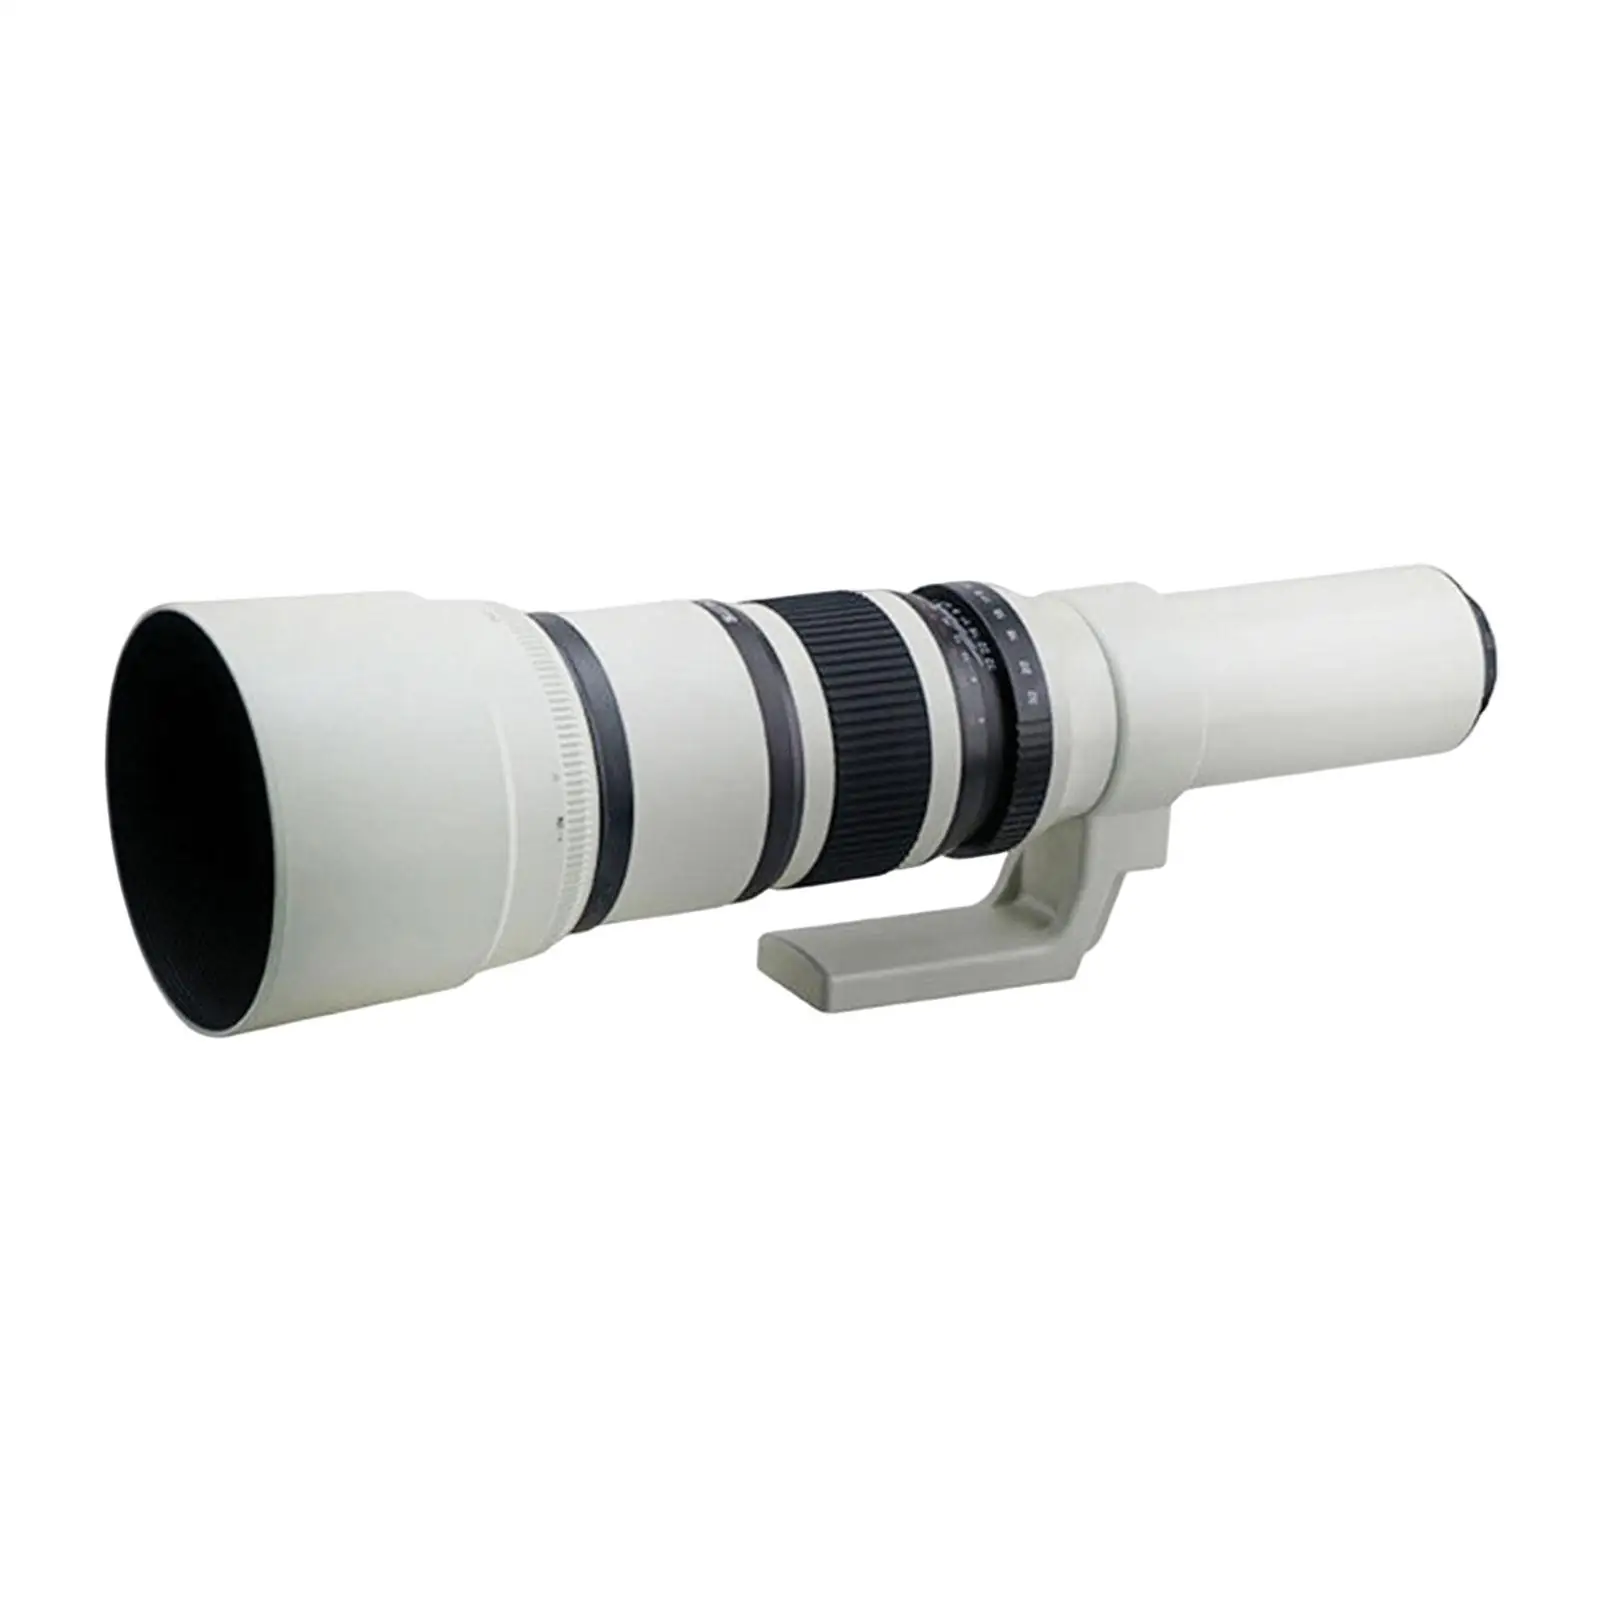 500mm F6.3-F32 Super Telephoto Lens Manual Focusing 86mm Front Filter Diameter Portable T2 Mount with PU Bag Fixed Focus Lens